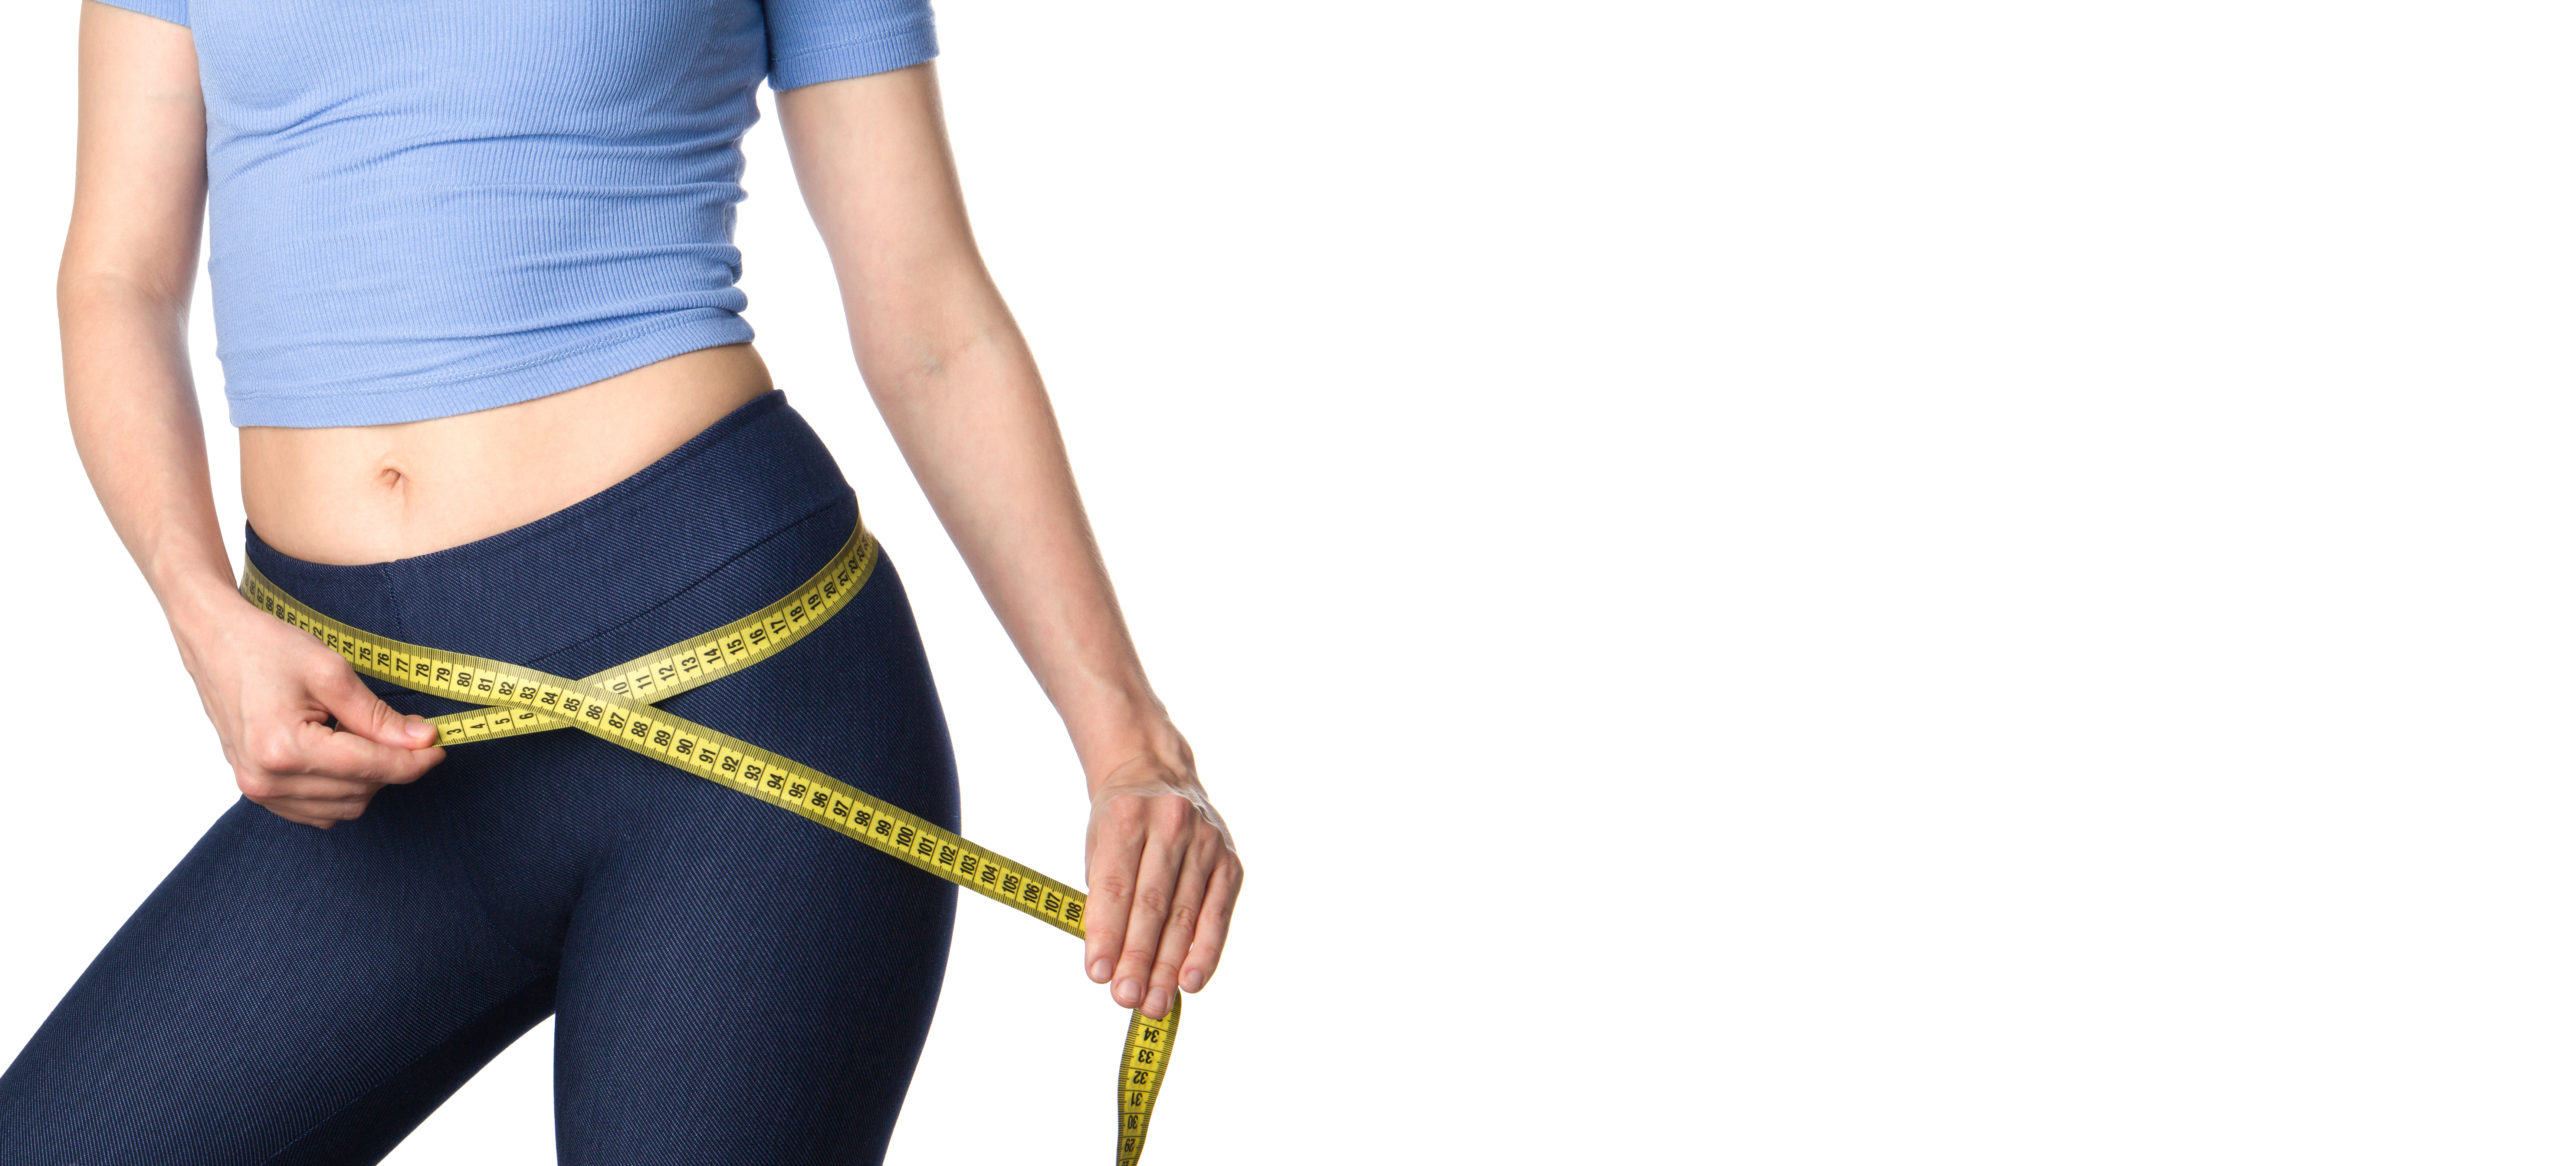 Woman measuring her body. Slim woman measuring her hips and buttocks isolated on white background. Healthy nutrition and weight losing concept. Body fat reduction. Fitness woman banner. Copy space.